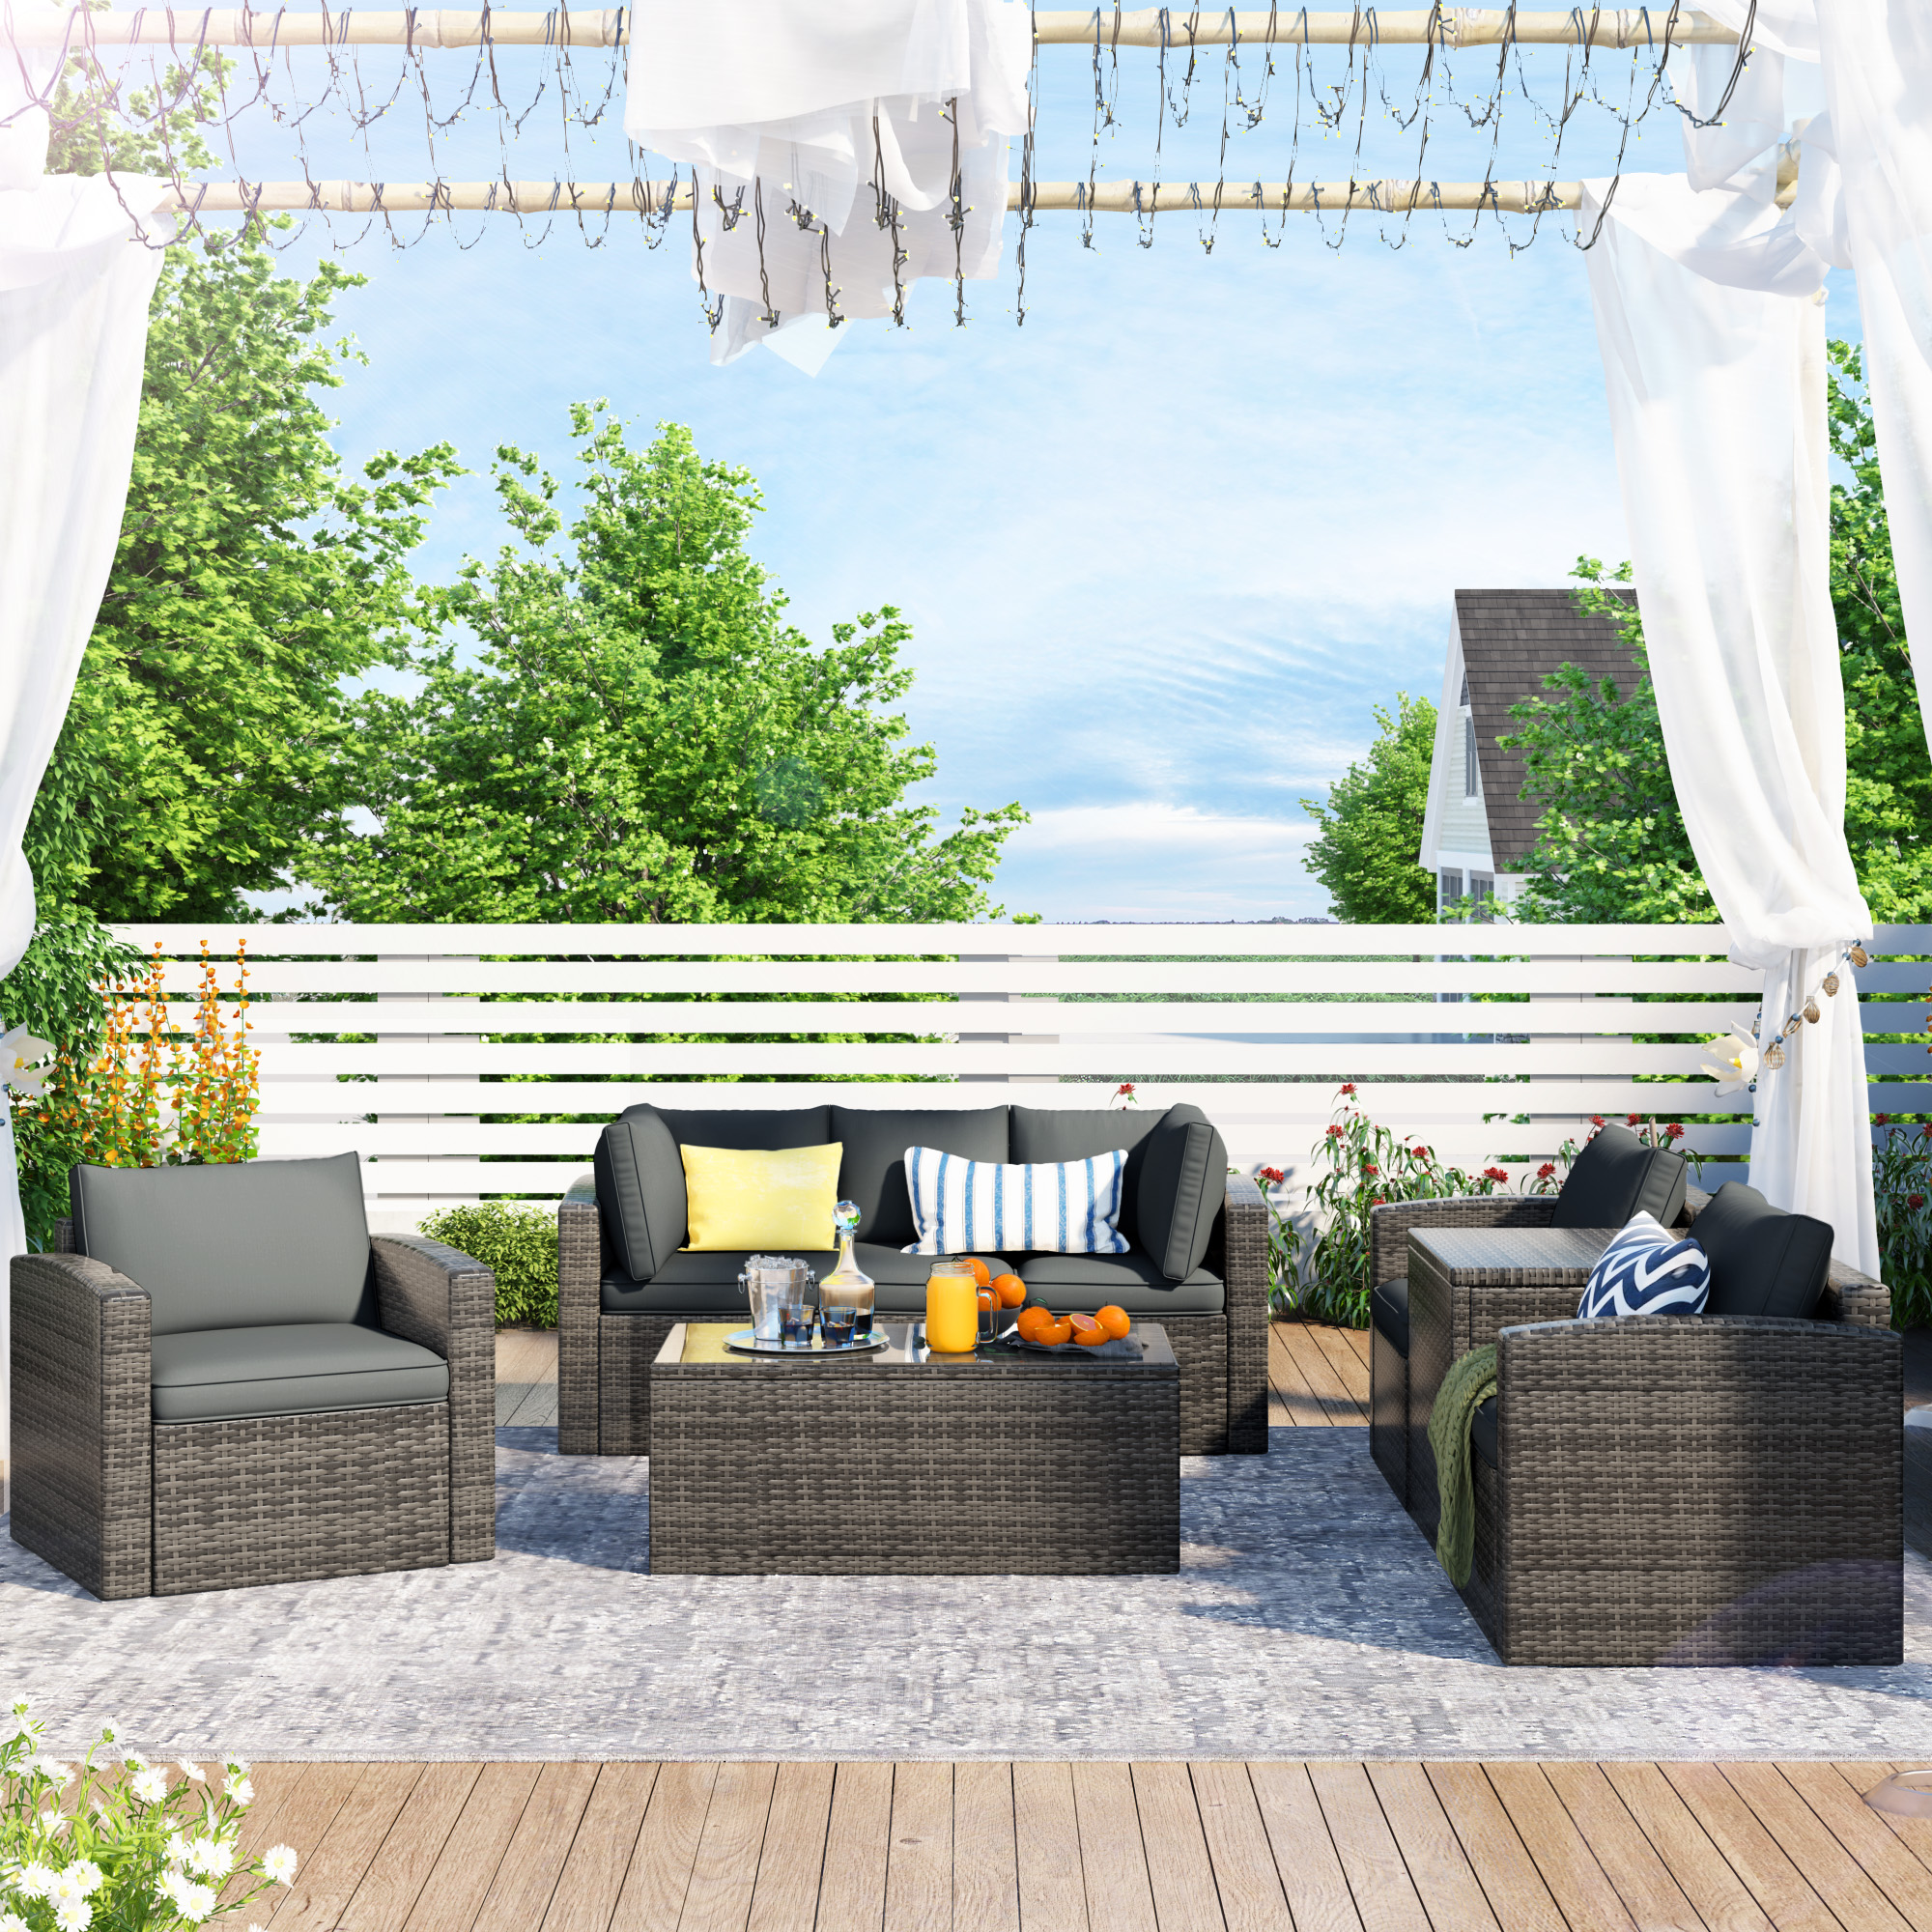 7-Piece Patio Wicker Sofa , Cushions, Chairs , A Loveseat , A Table And A Storage Box - WY000216EAA